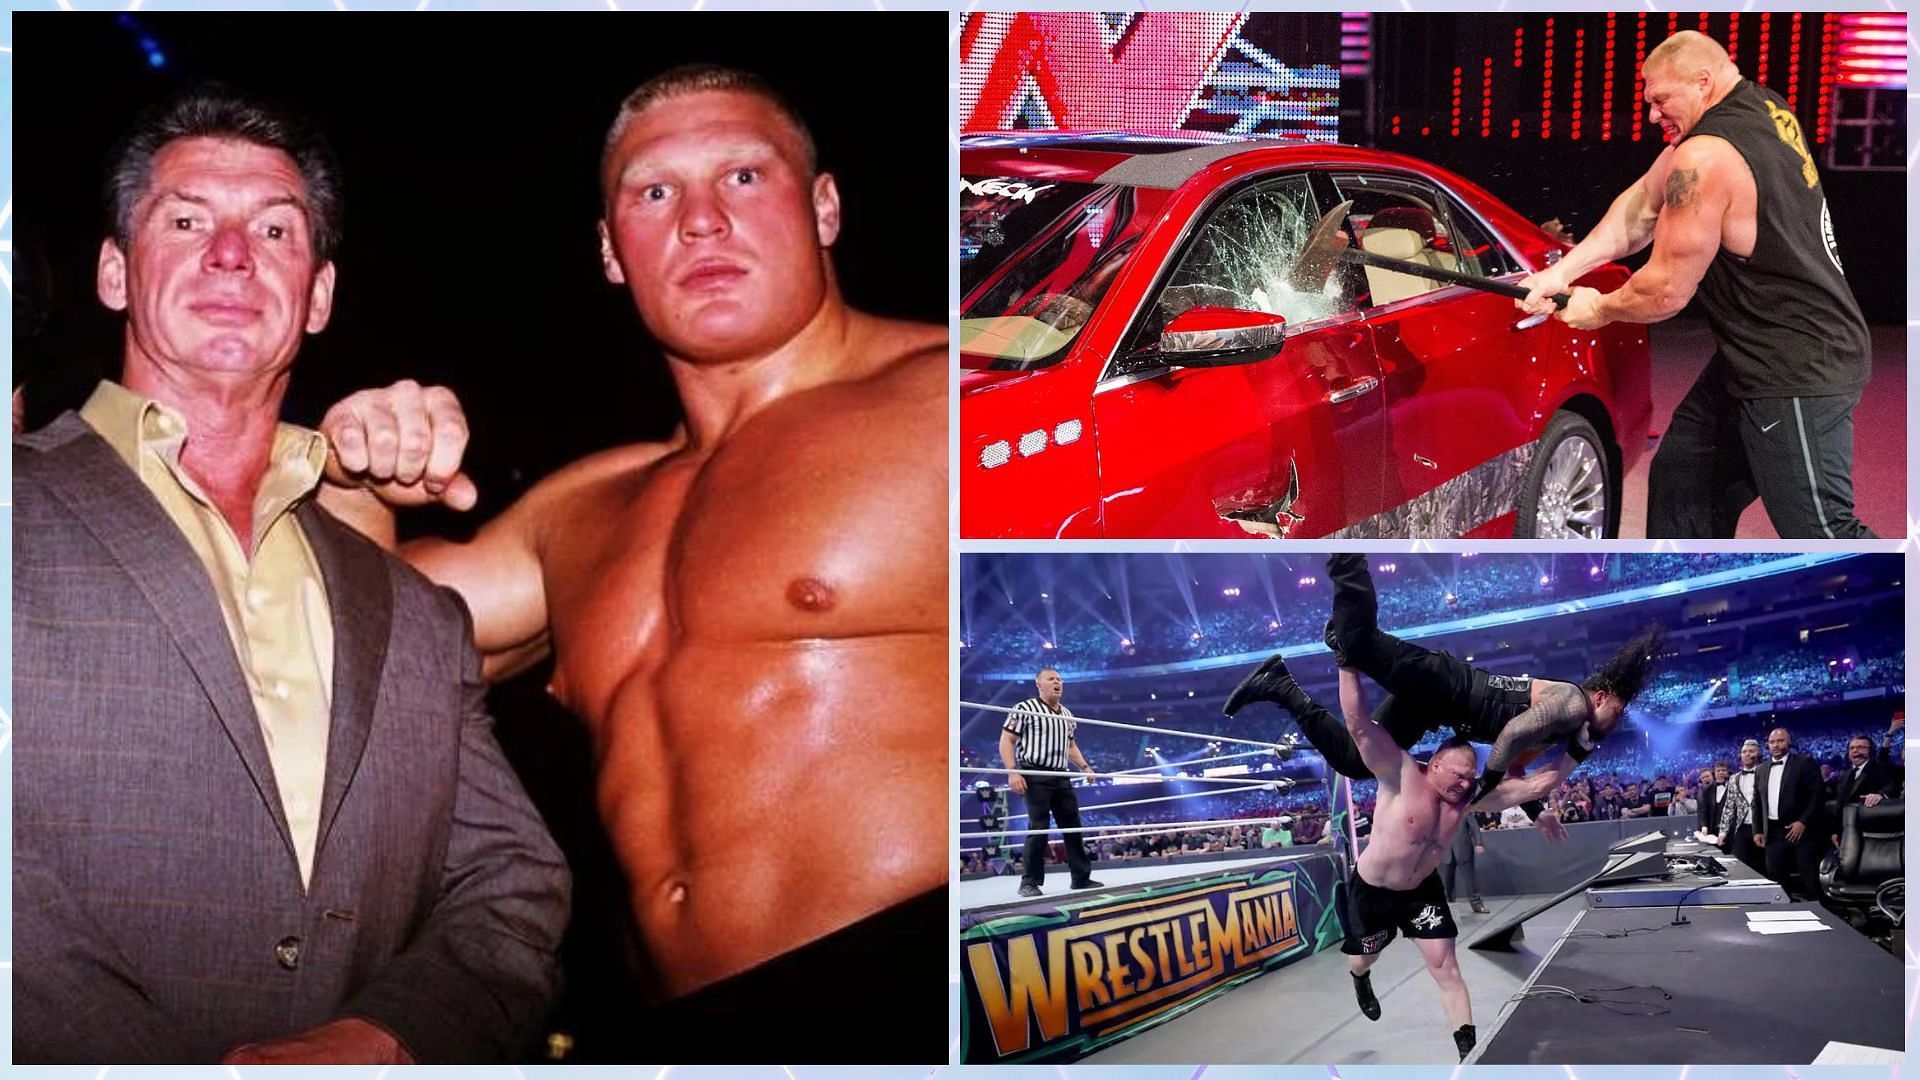 Brock Lesnar carved his way to become the &quot;invincible monster.&quot;